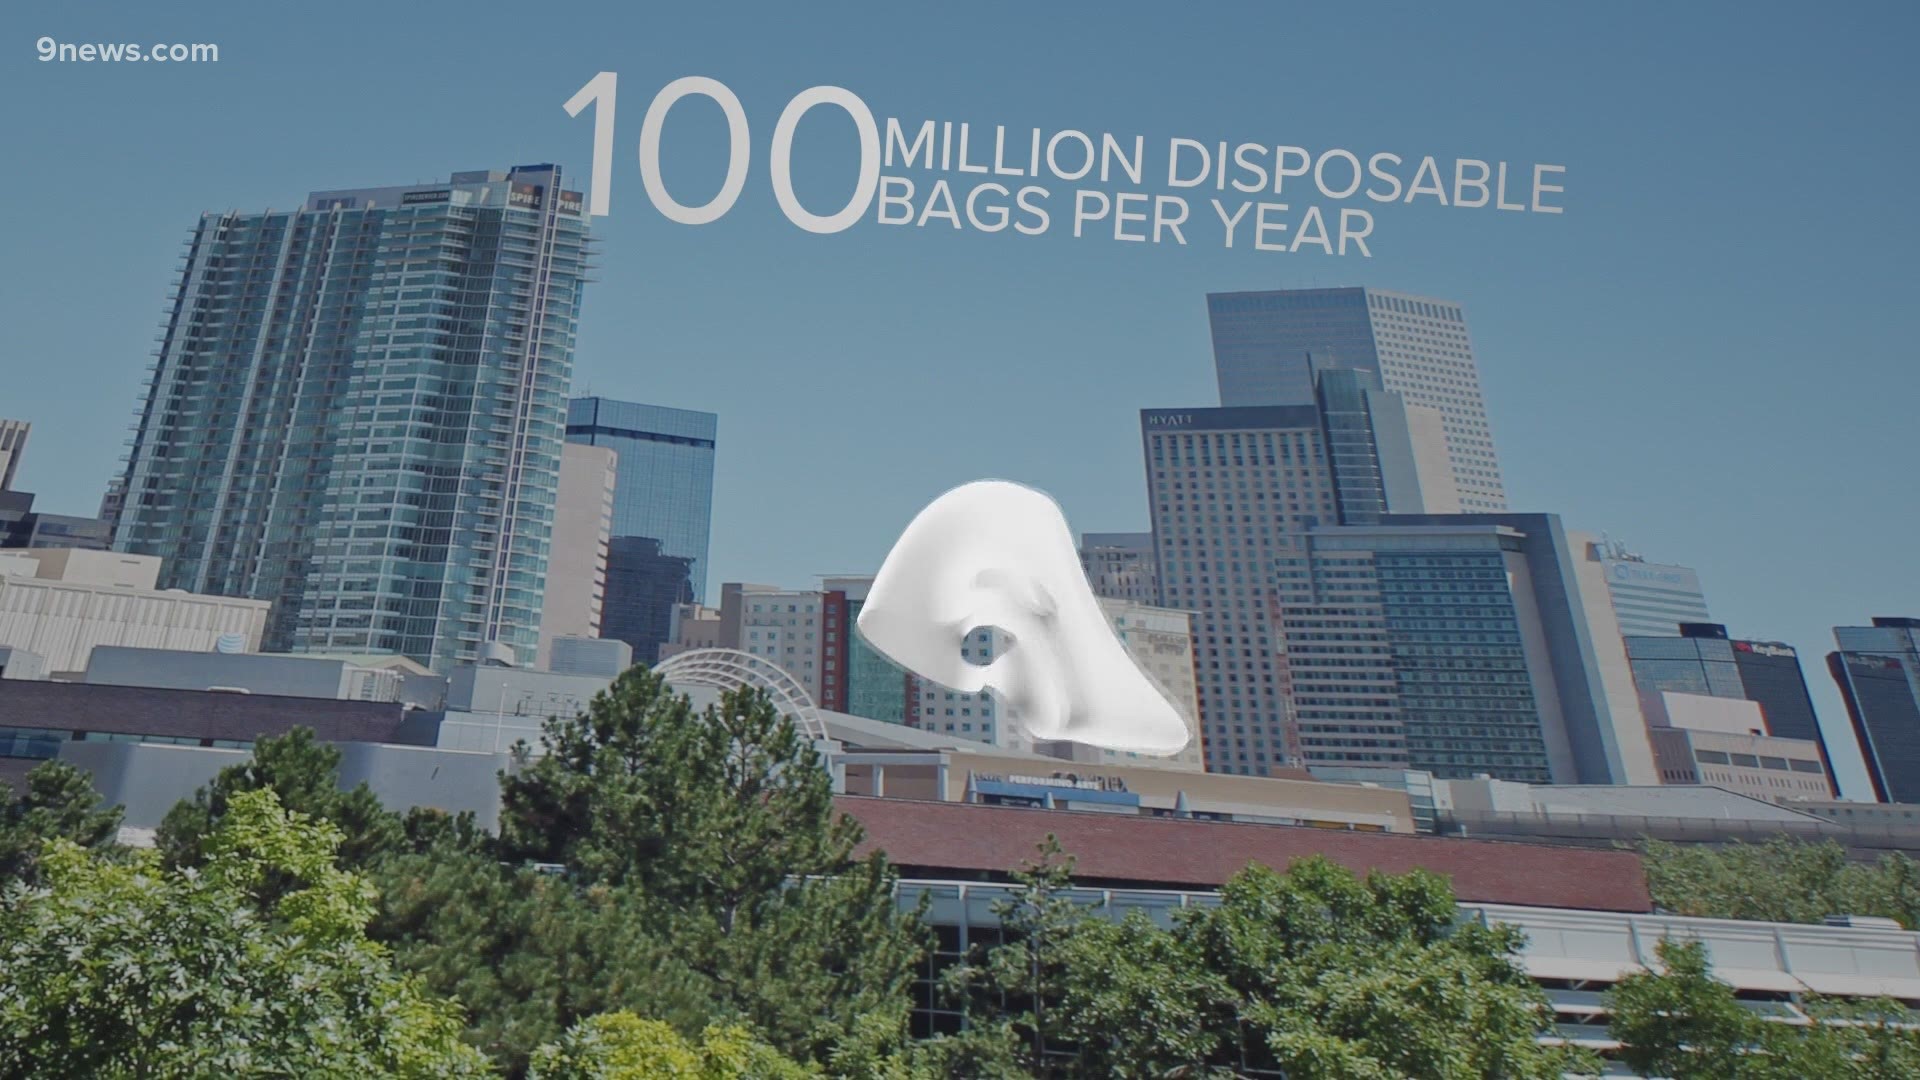 Effective July 1, many retail stores in the city and county of Denver will have to charge customers 10 cents per plastic bag.